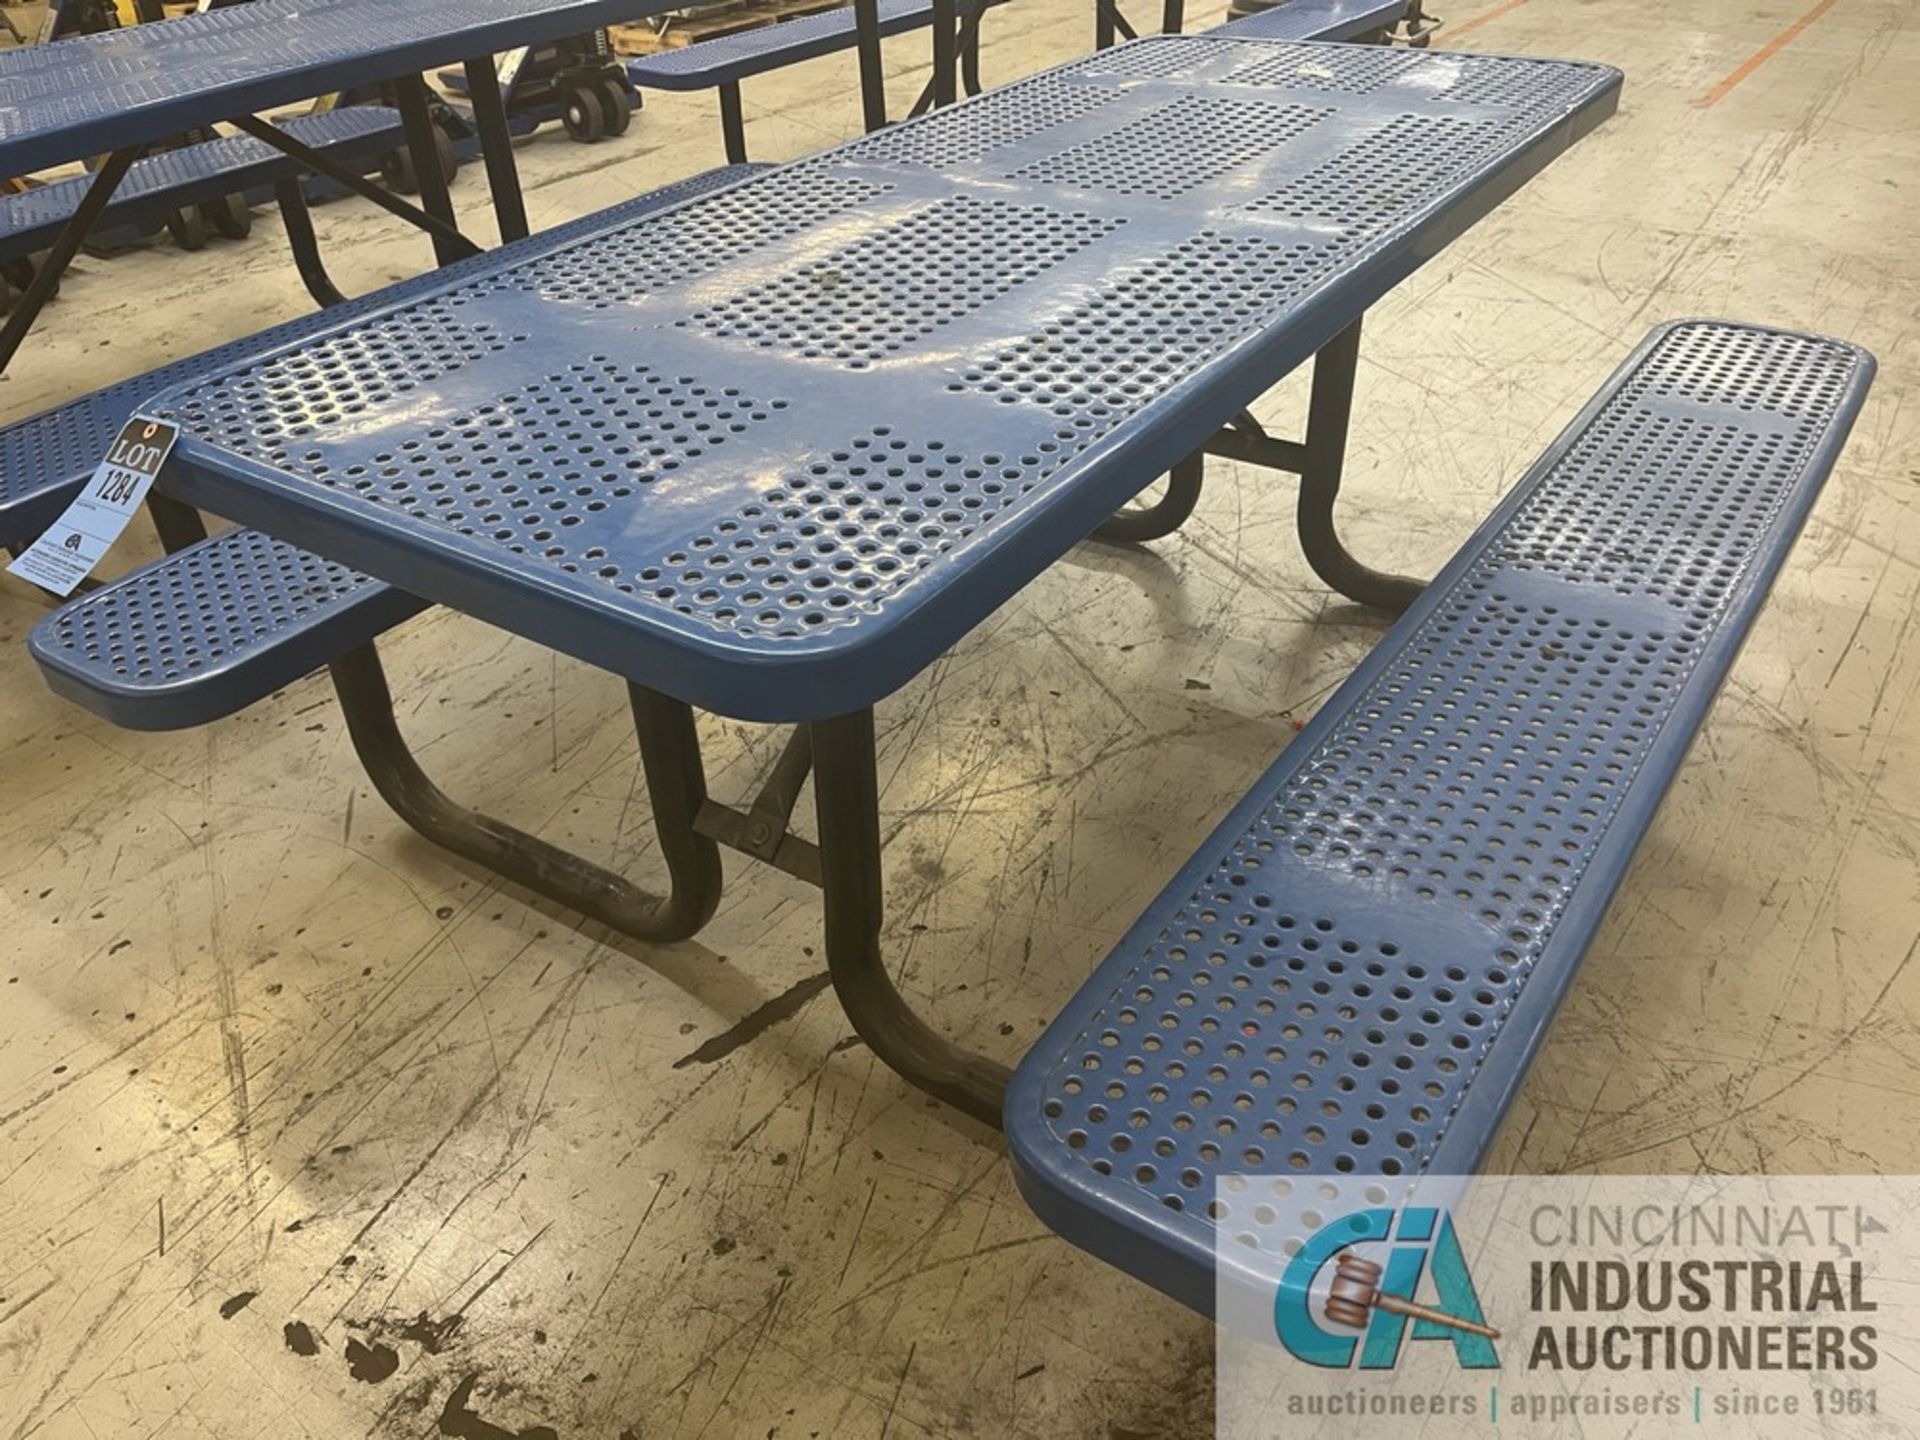 6' COATED STEEL PICNIC TABLE